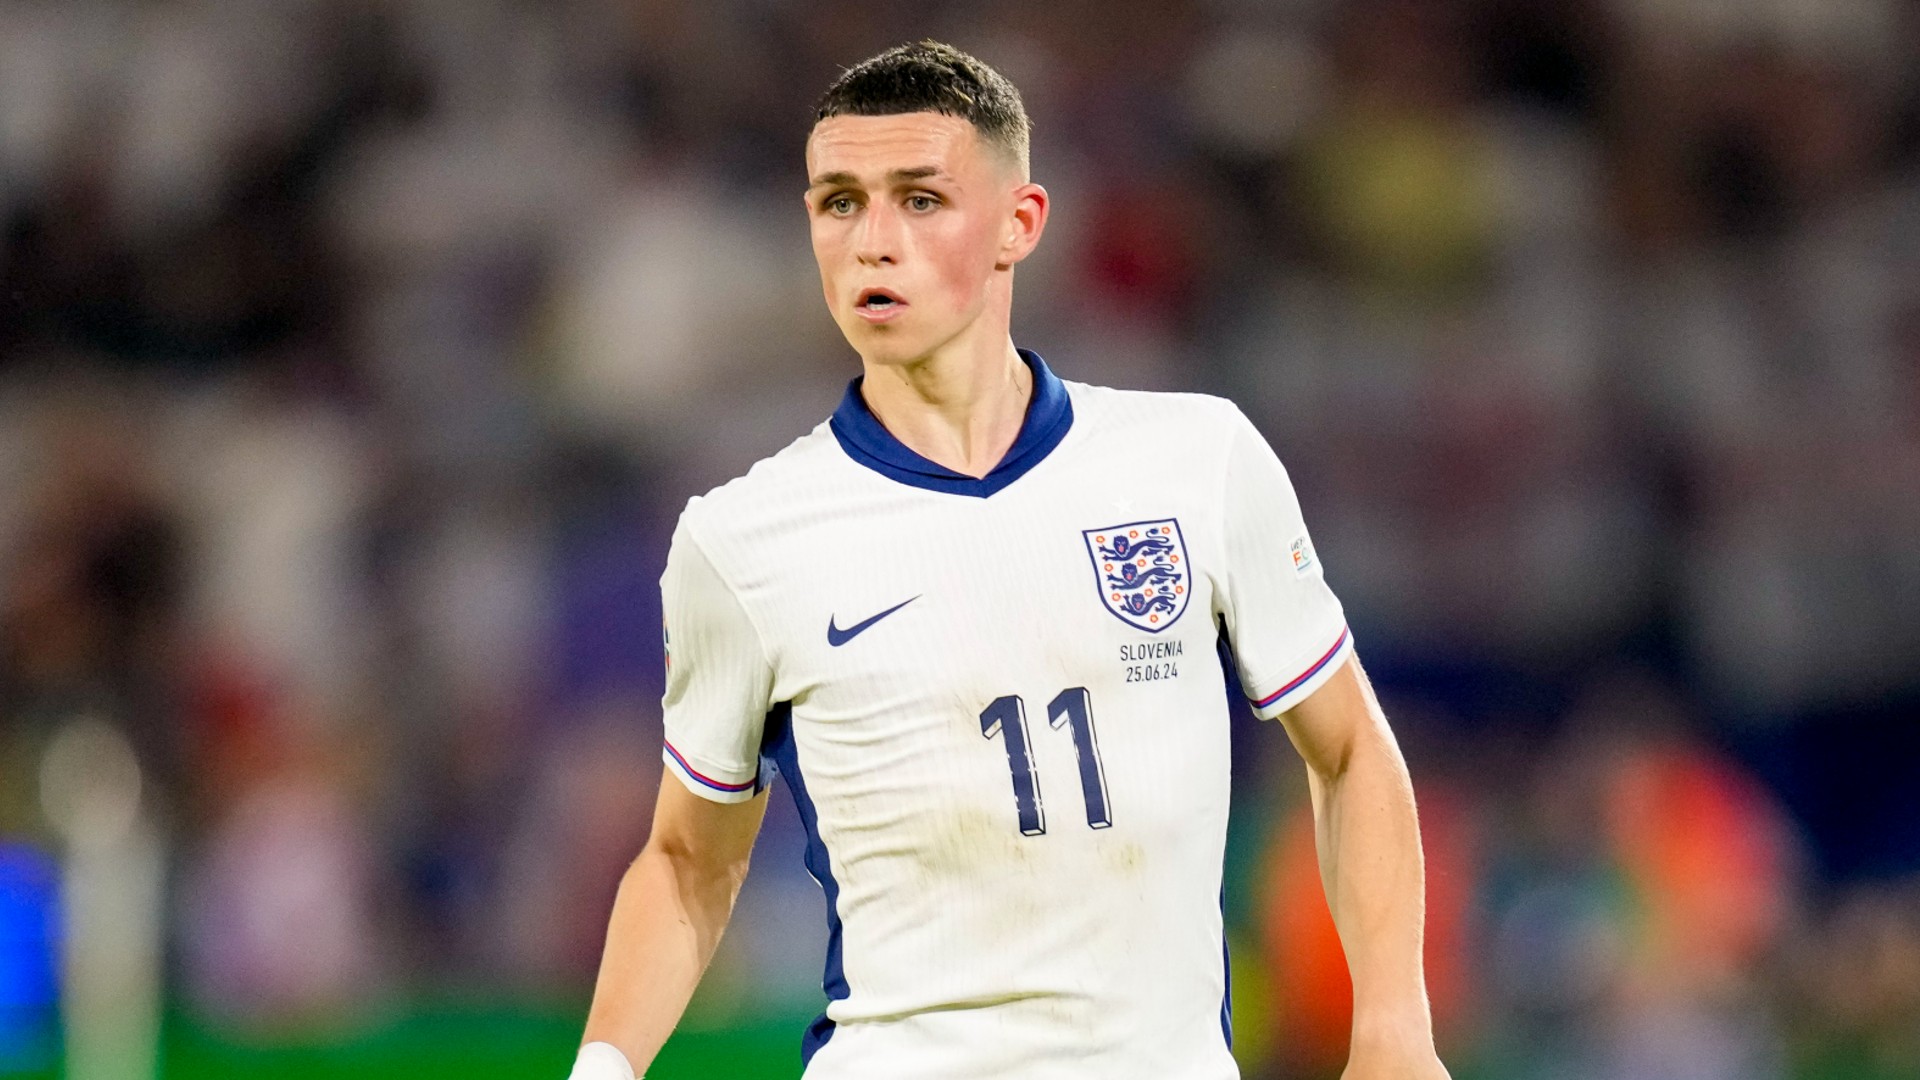 Foden travels back to Germany